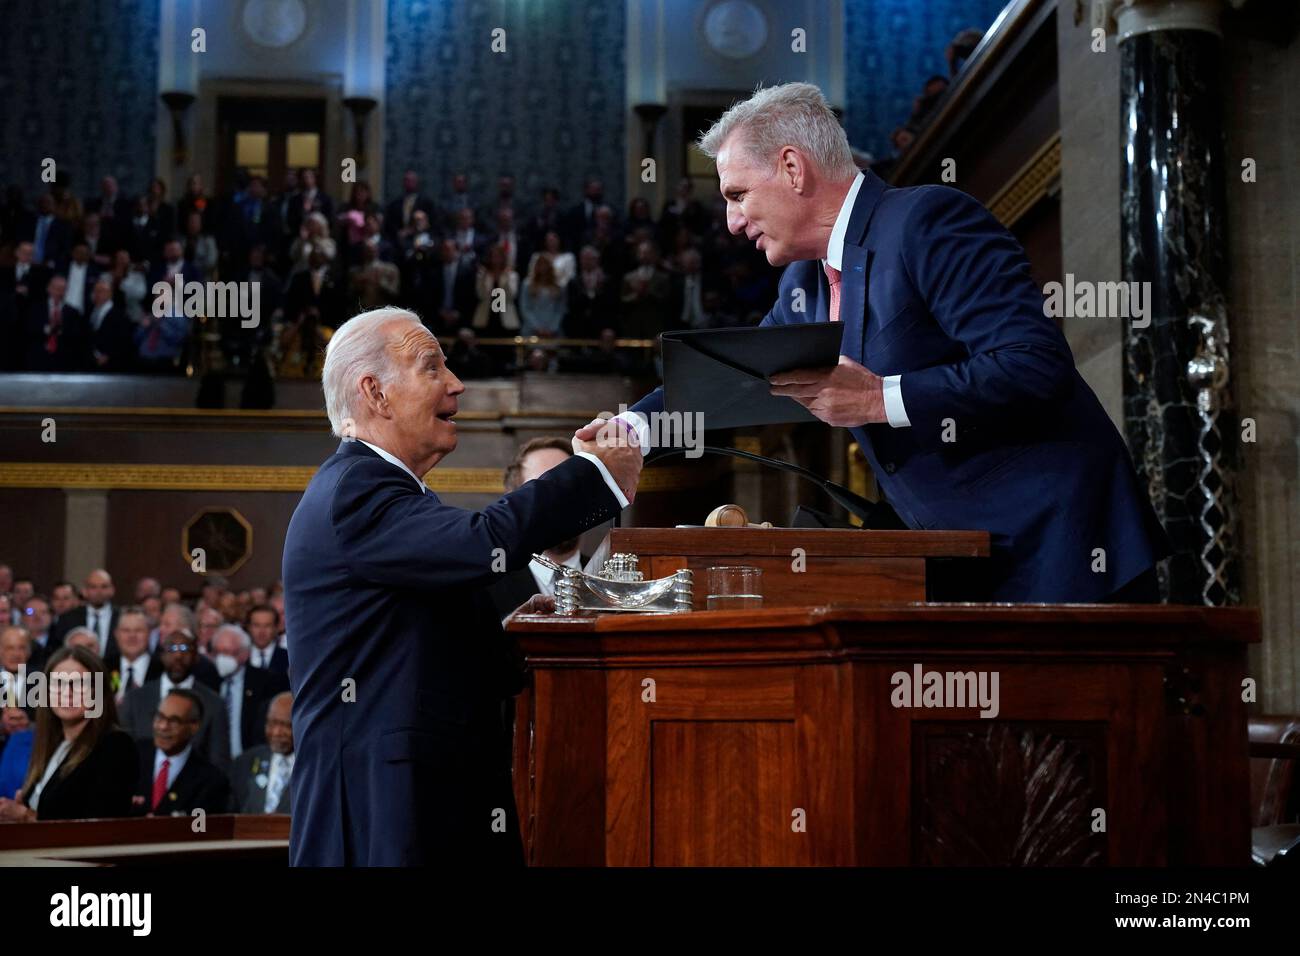 President Joe Biden shakes hands as he presents a copy of his speech to House Speaker Kevin McCarthy of Calif., before he delivers his State of the Union address to a joint session of Congress, at the Capitol in Washington, Tuesday, Feb. 7, 2023. Photo by Jacquelyn Martin/Pool/ABACAPRESS.COM Stock Photo